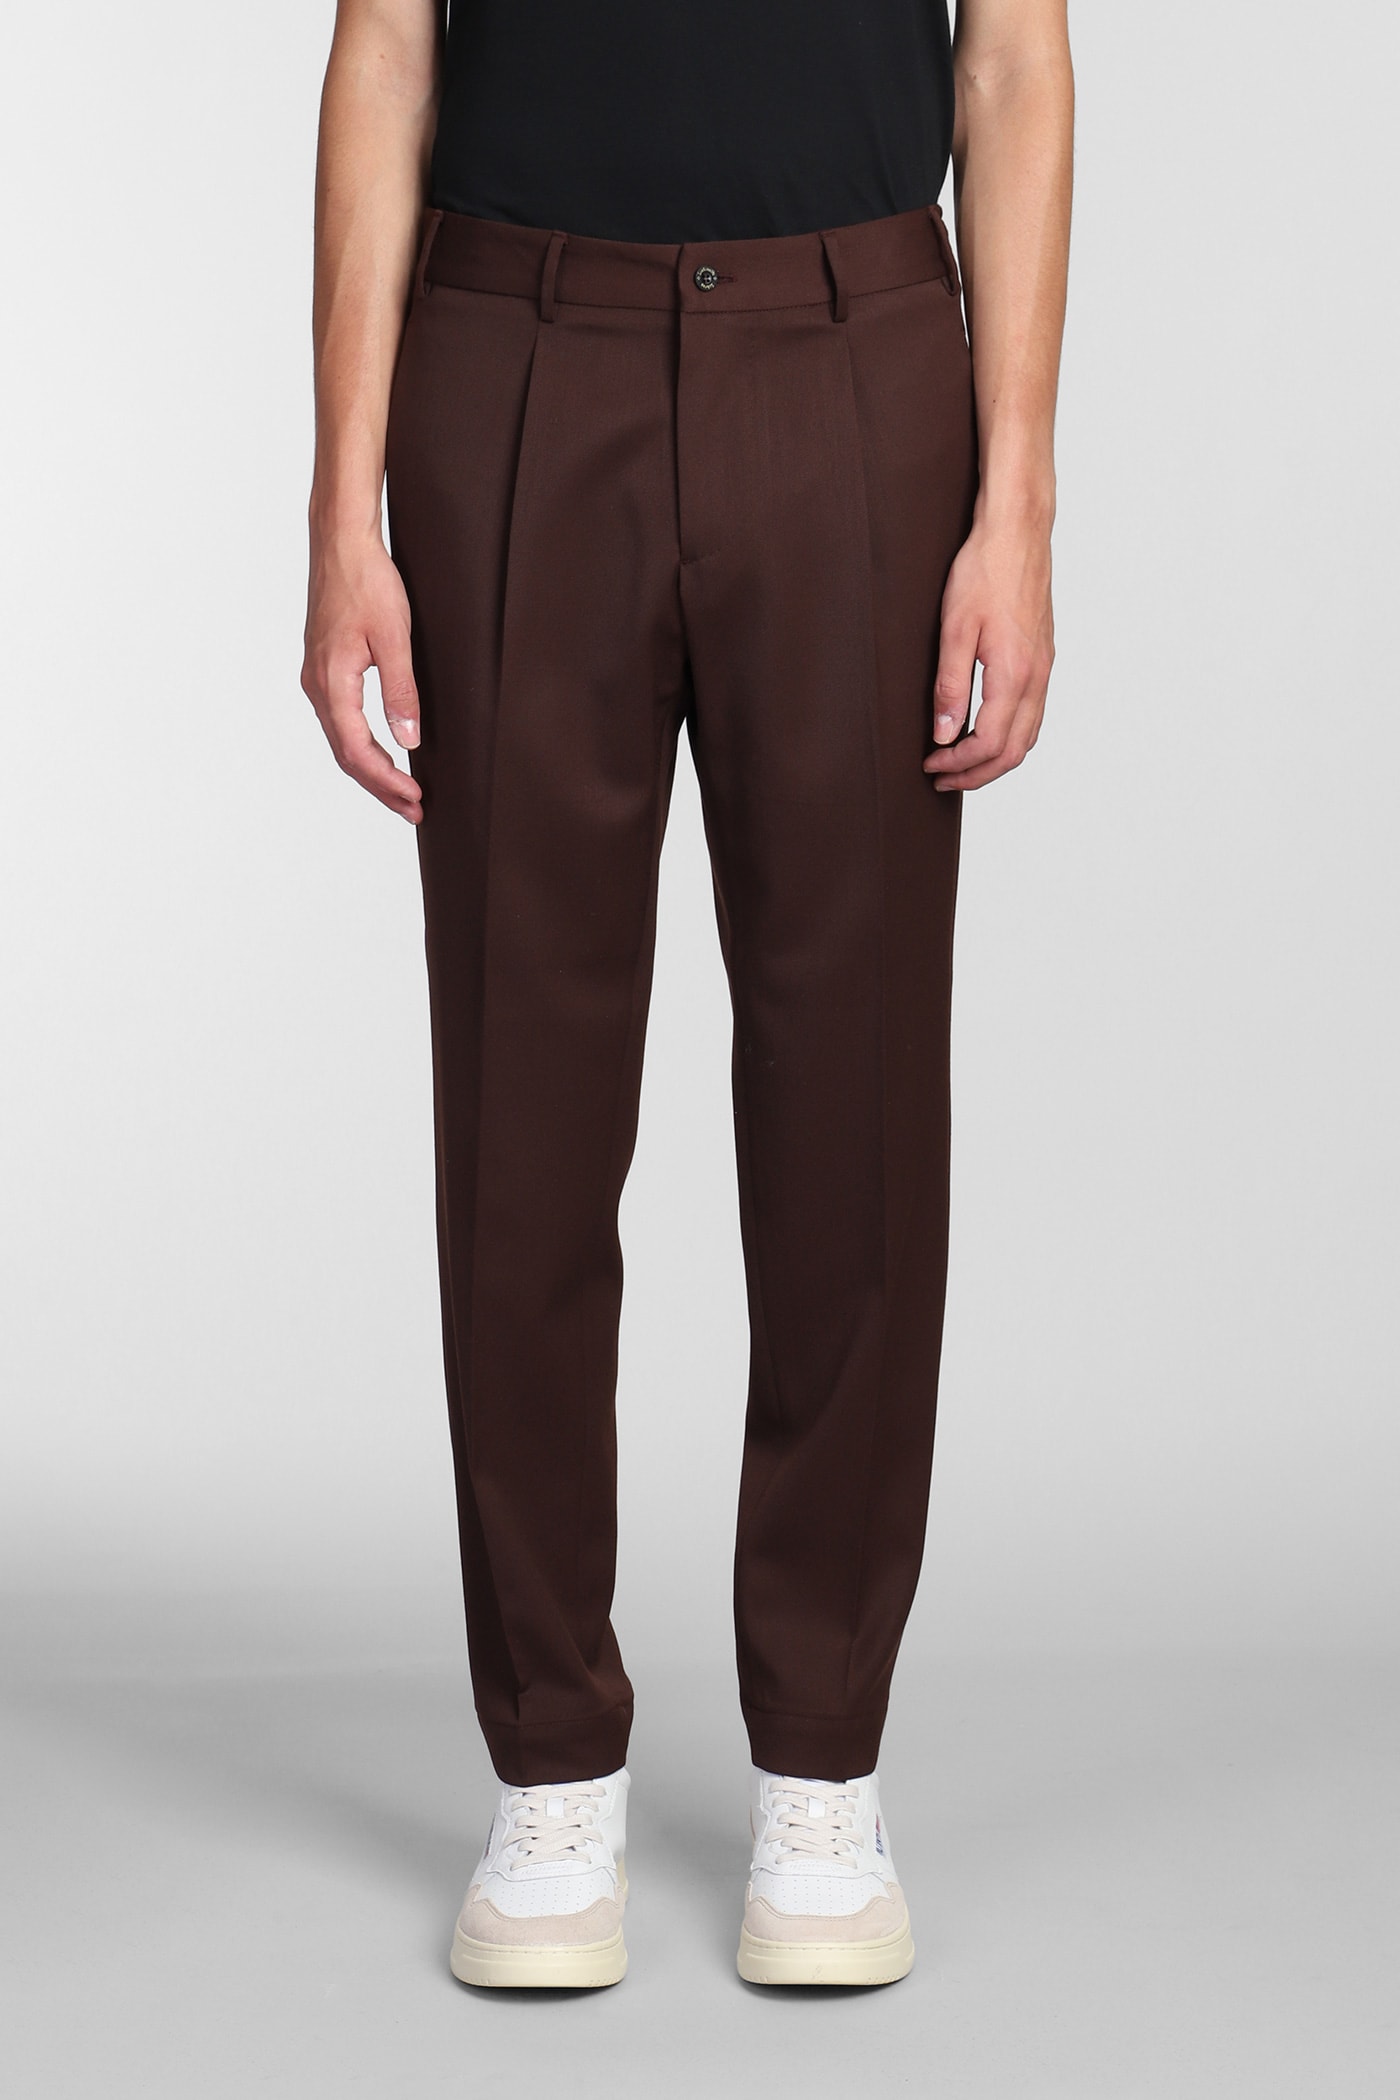 Pants In Brown Polyester